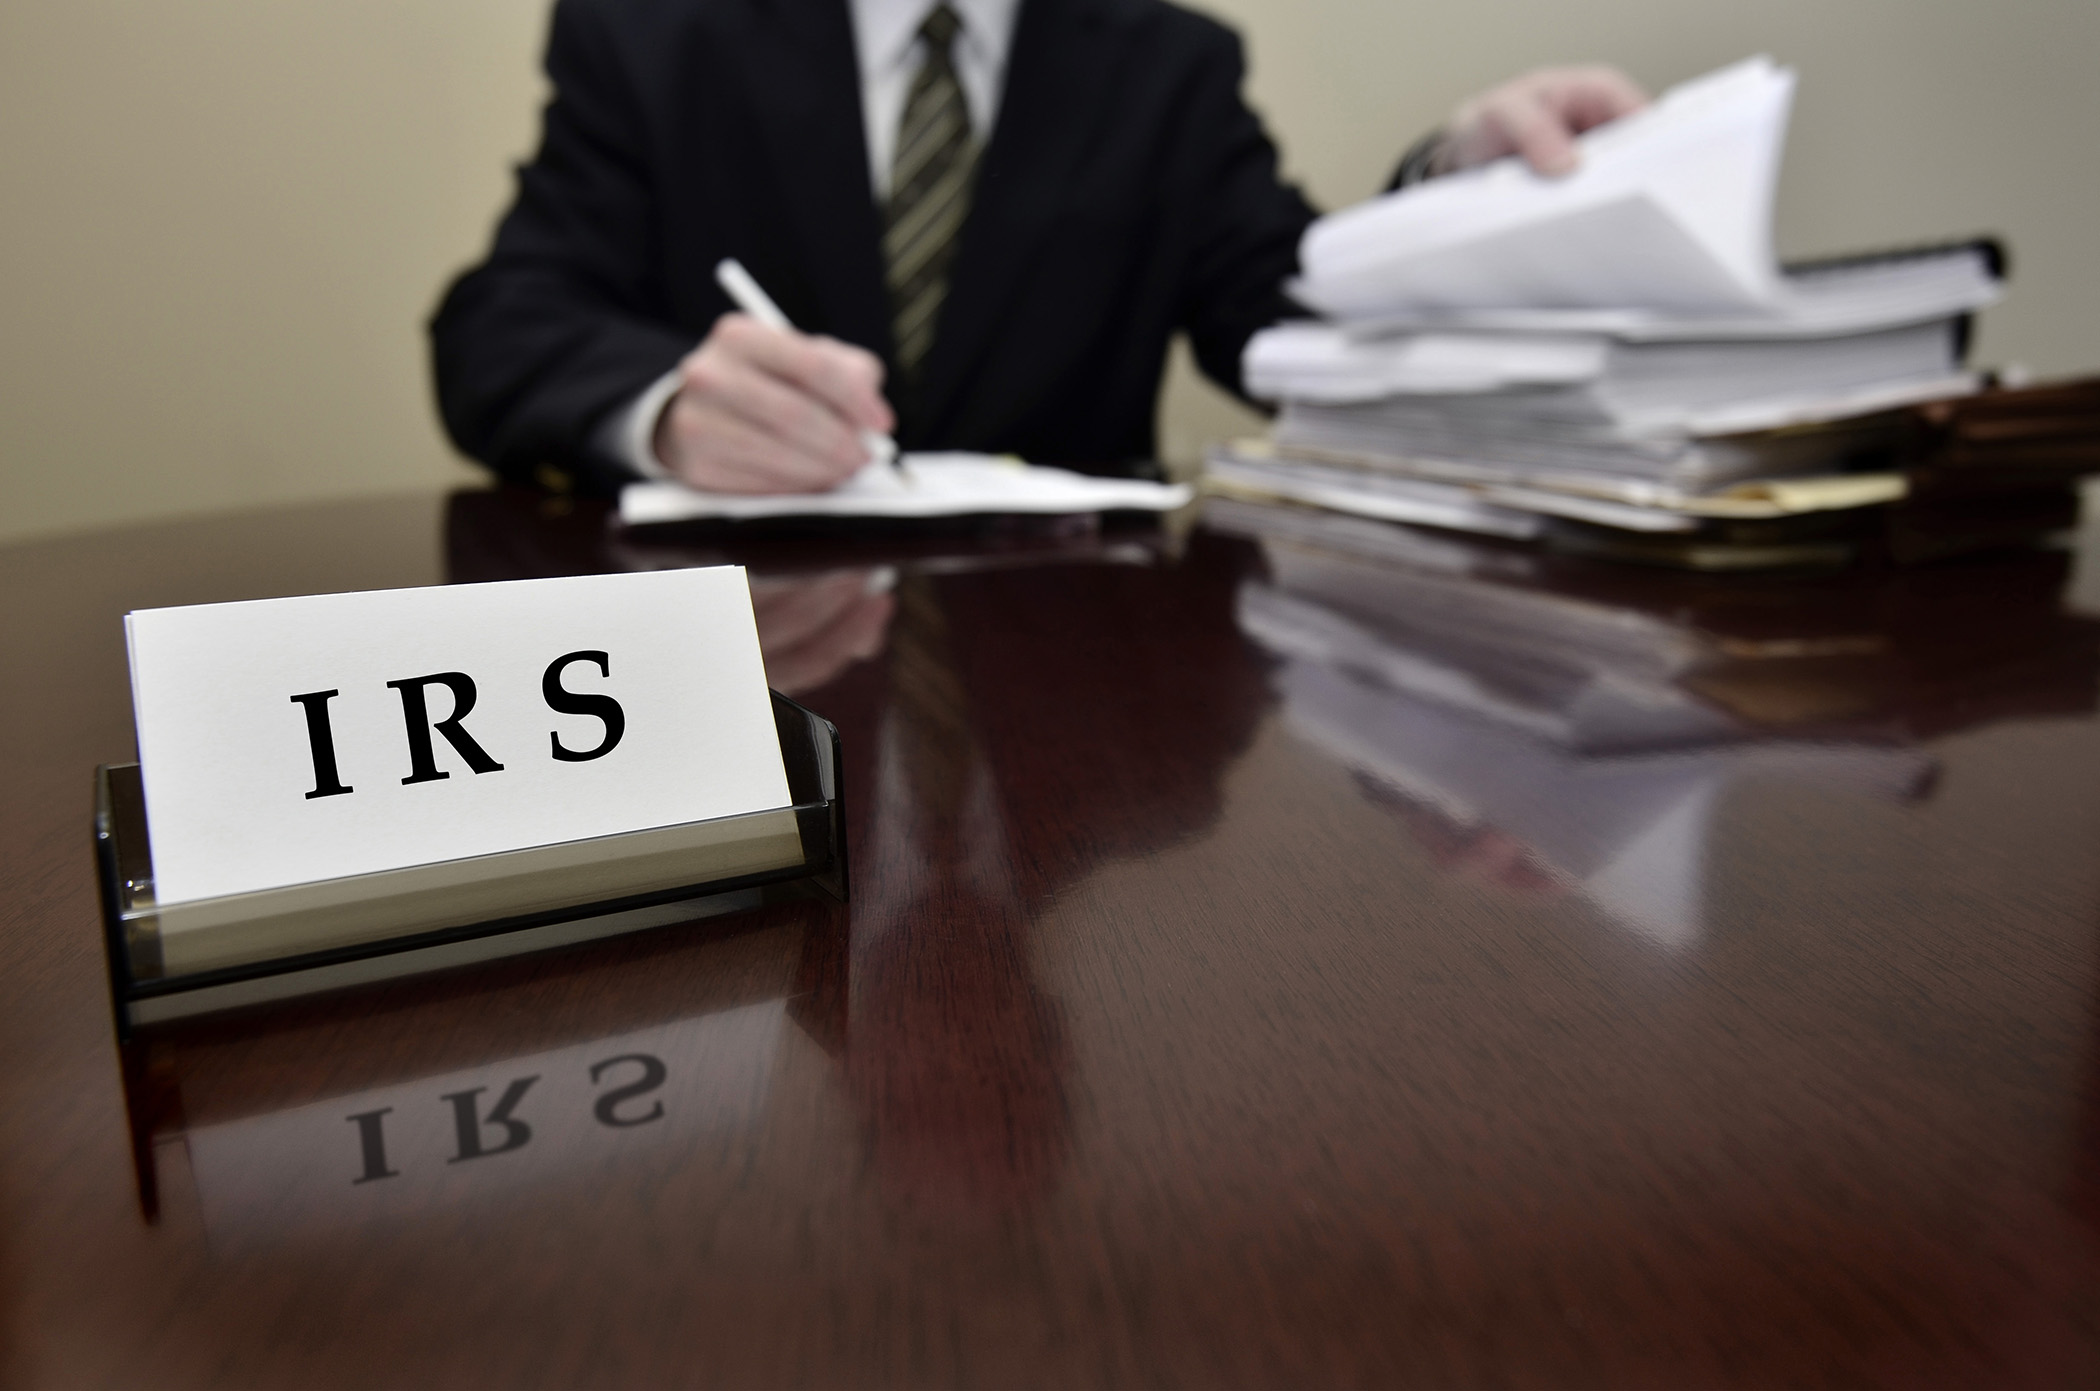 IRS Tax Audits Are Down for Their Fifth Year in a Row